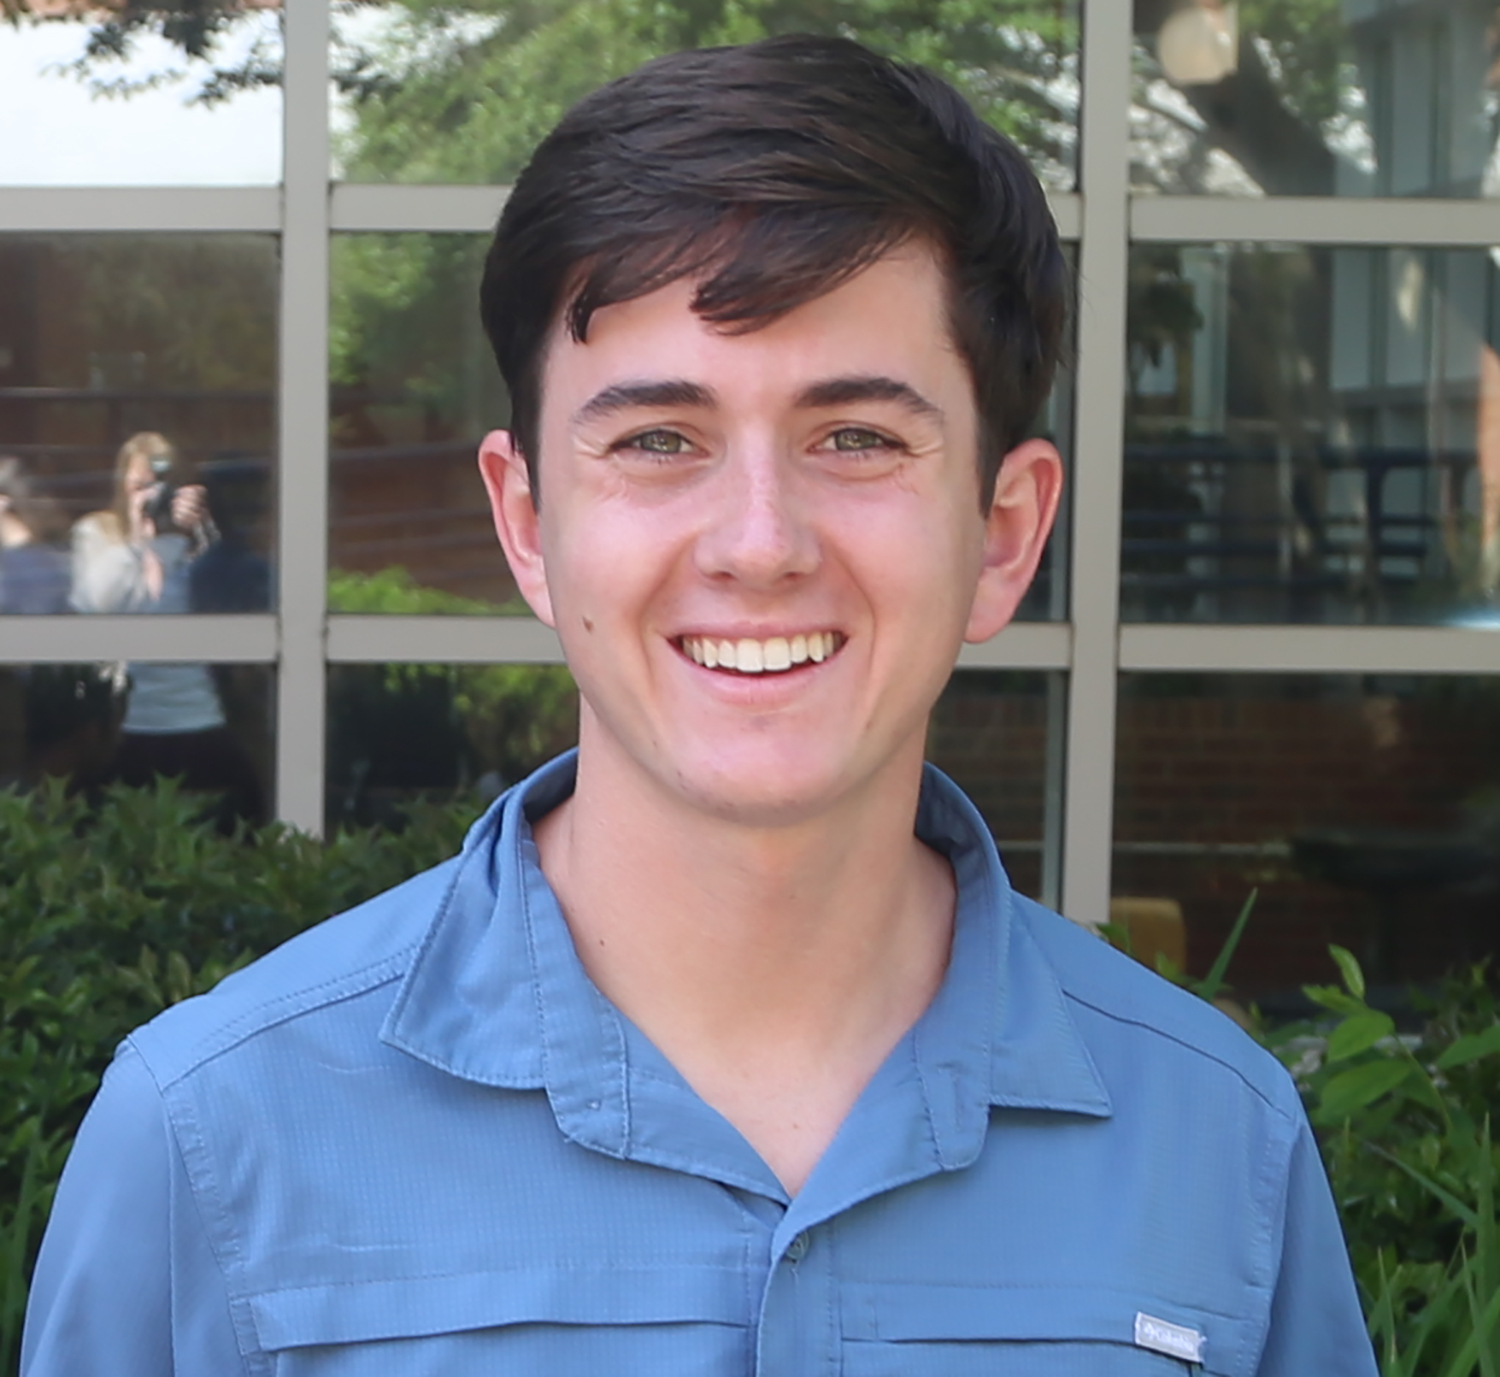 Jerett Lupoli is a Campus Services Student Spotlight for Spring 2019.